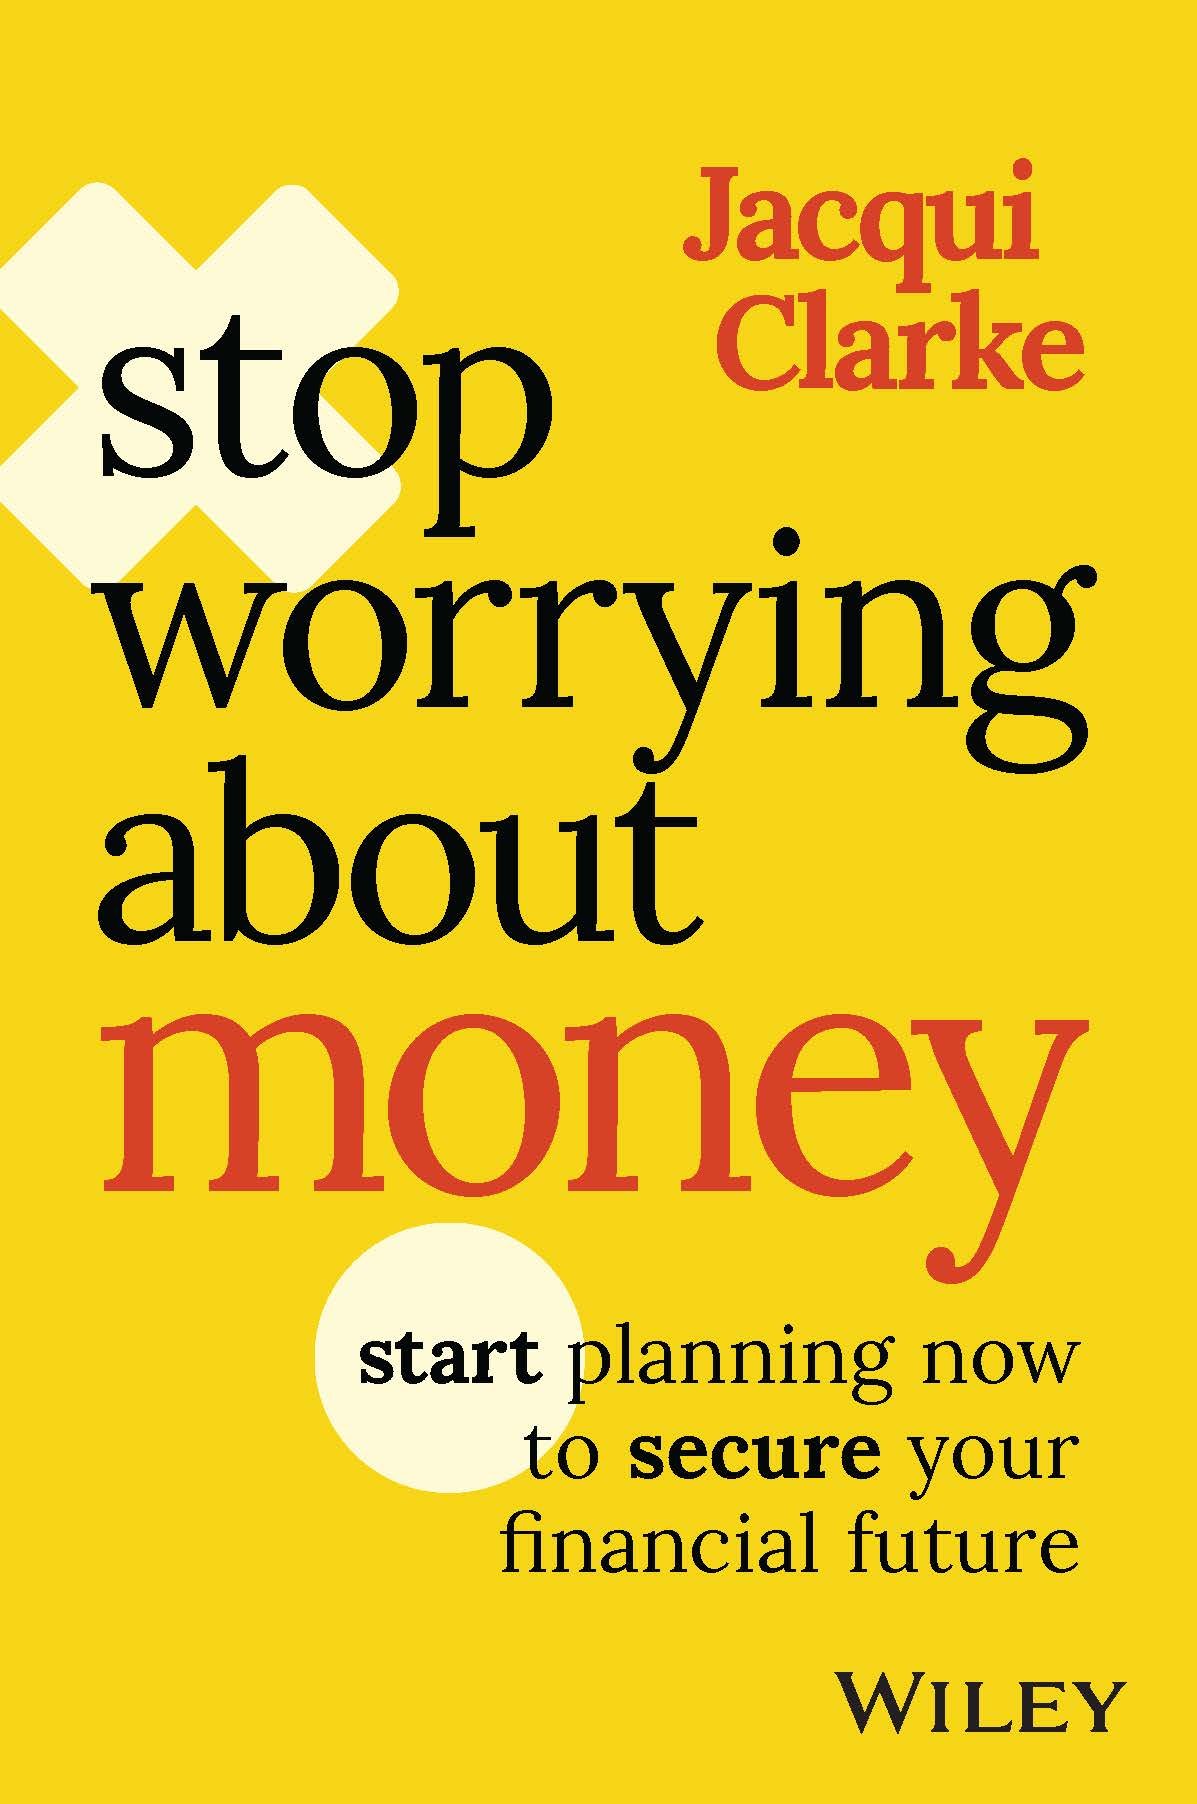 Stop Worrying About Money.jpg